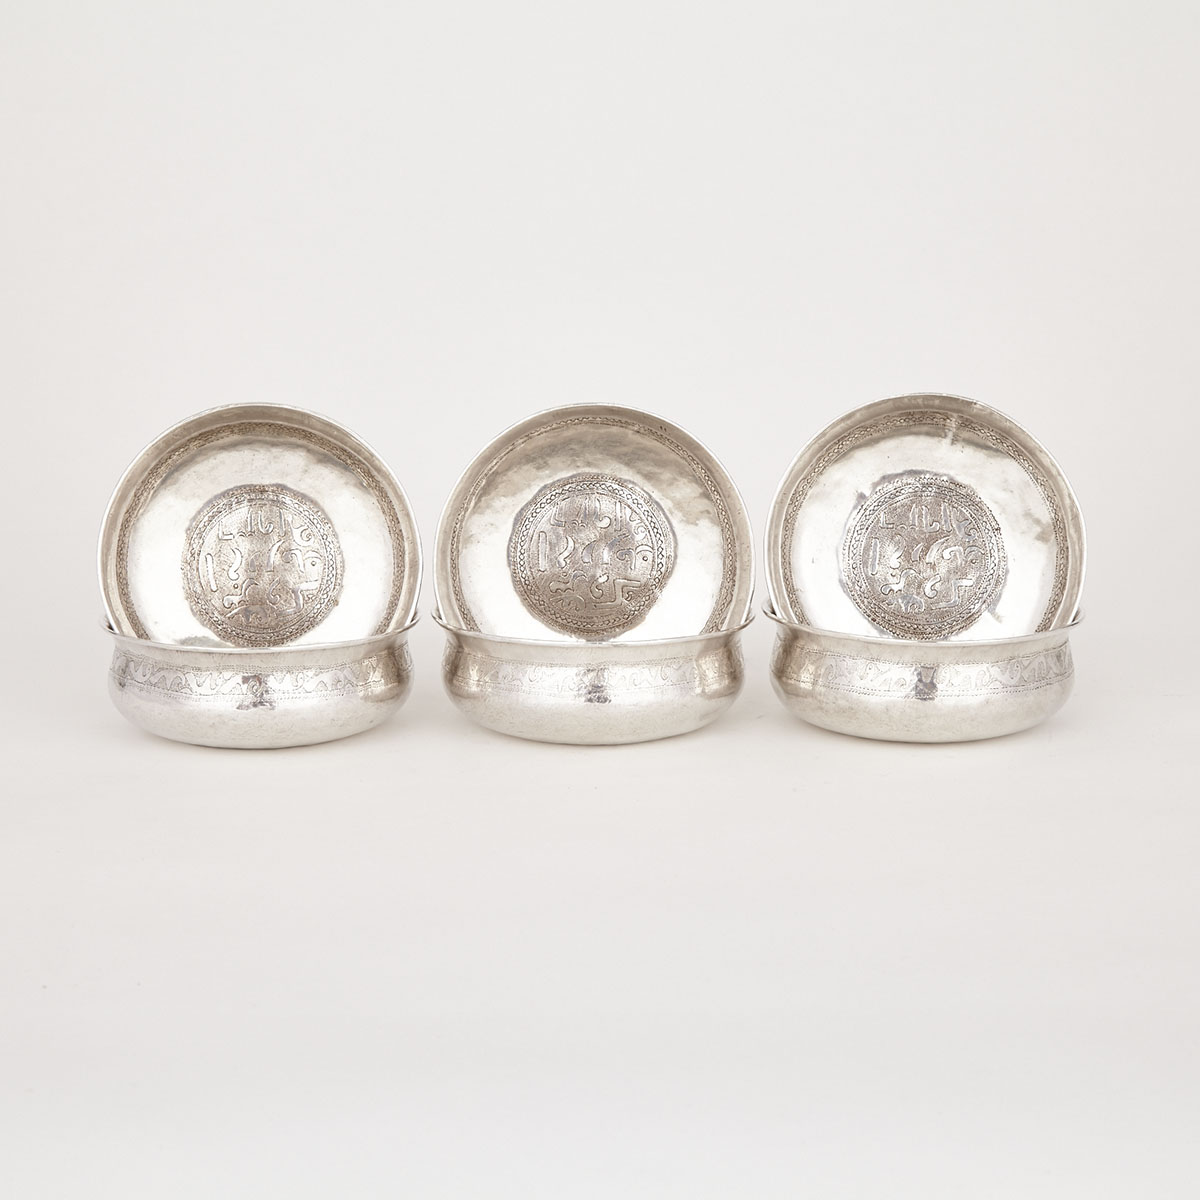 Set of Six Persian Silver Finger Bowls, late 19th/early 20th century